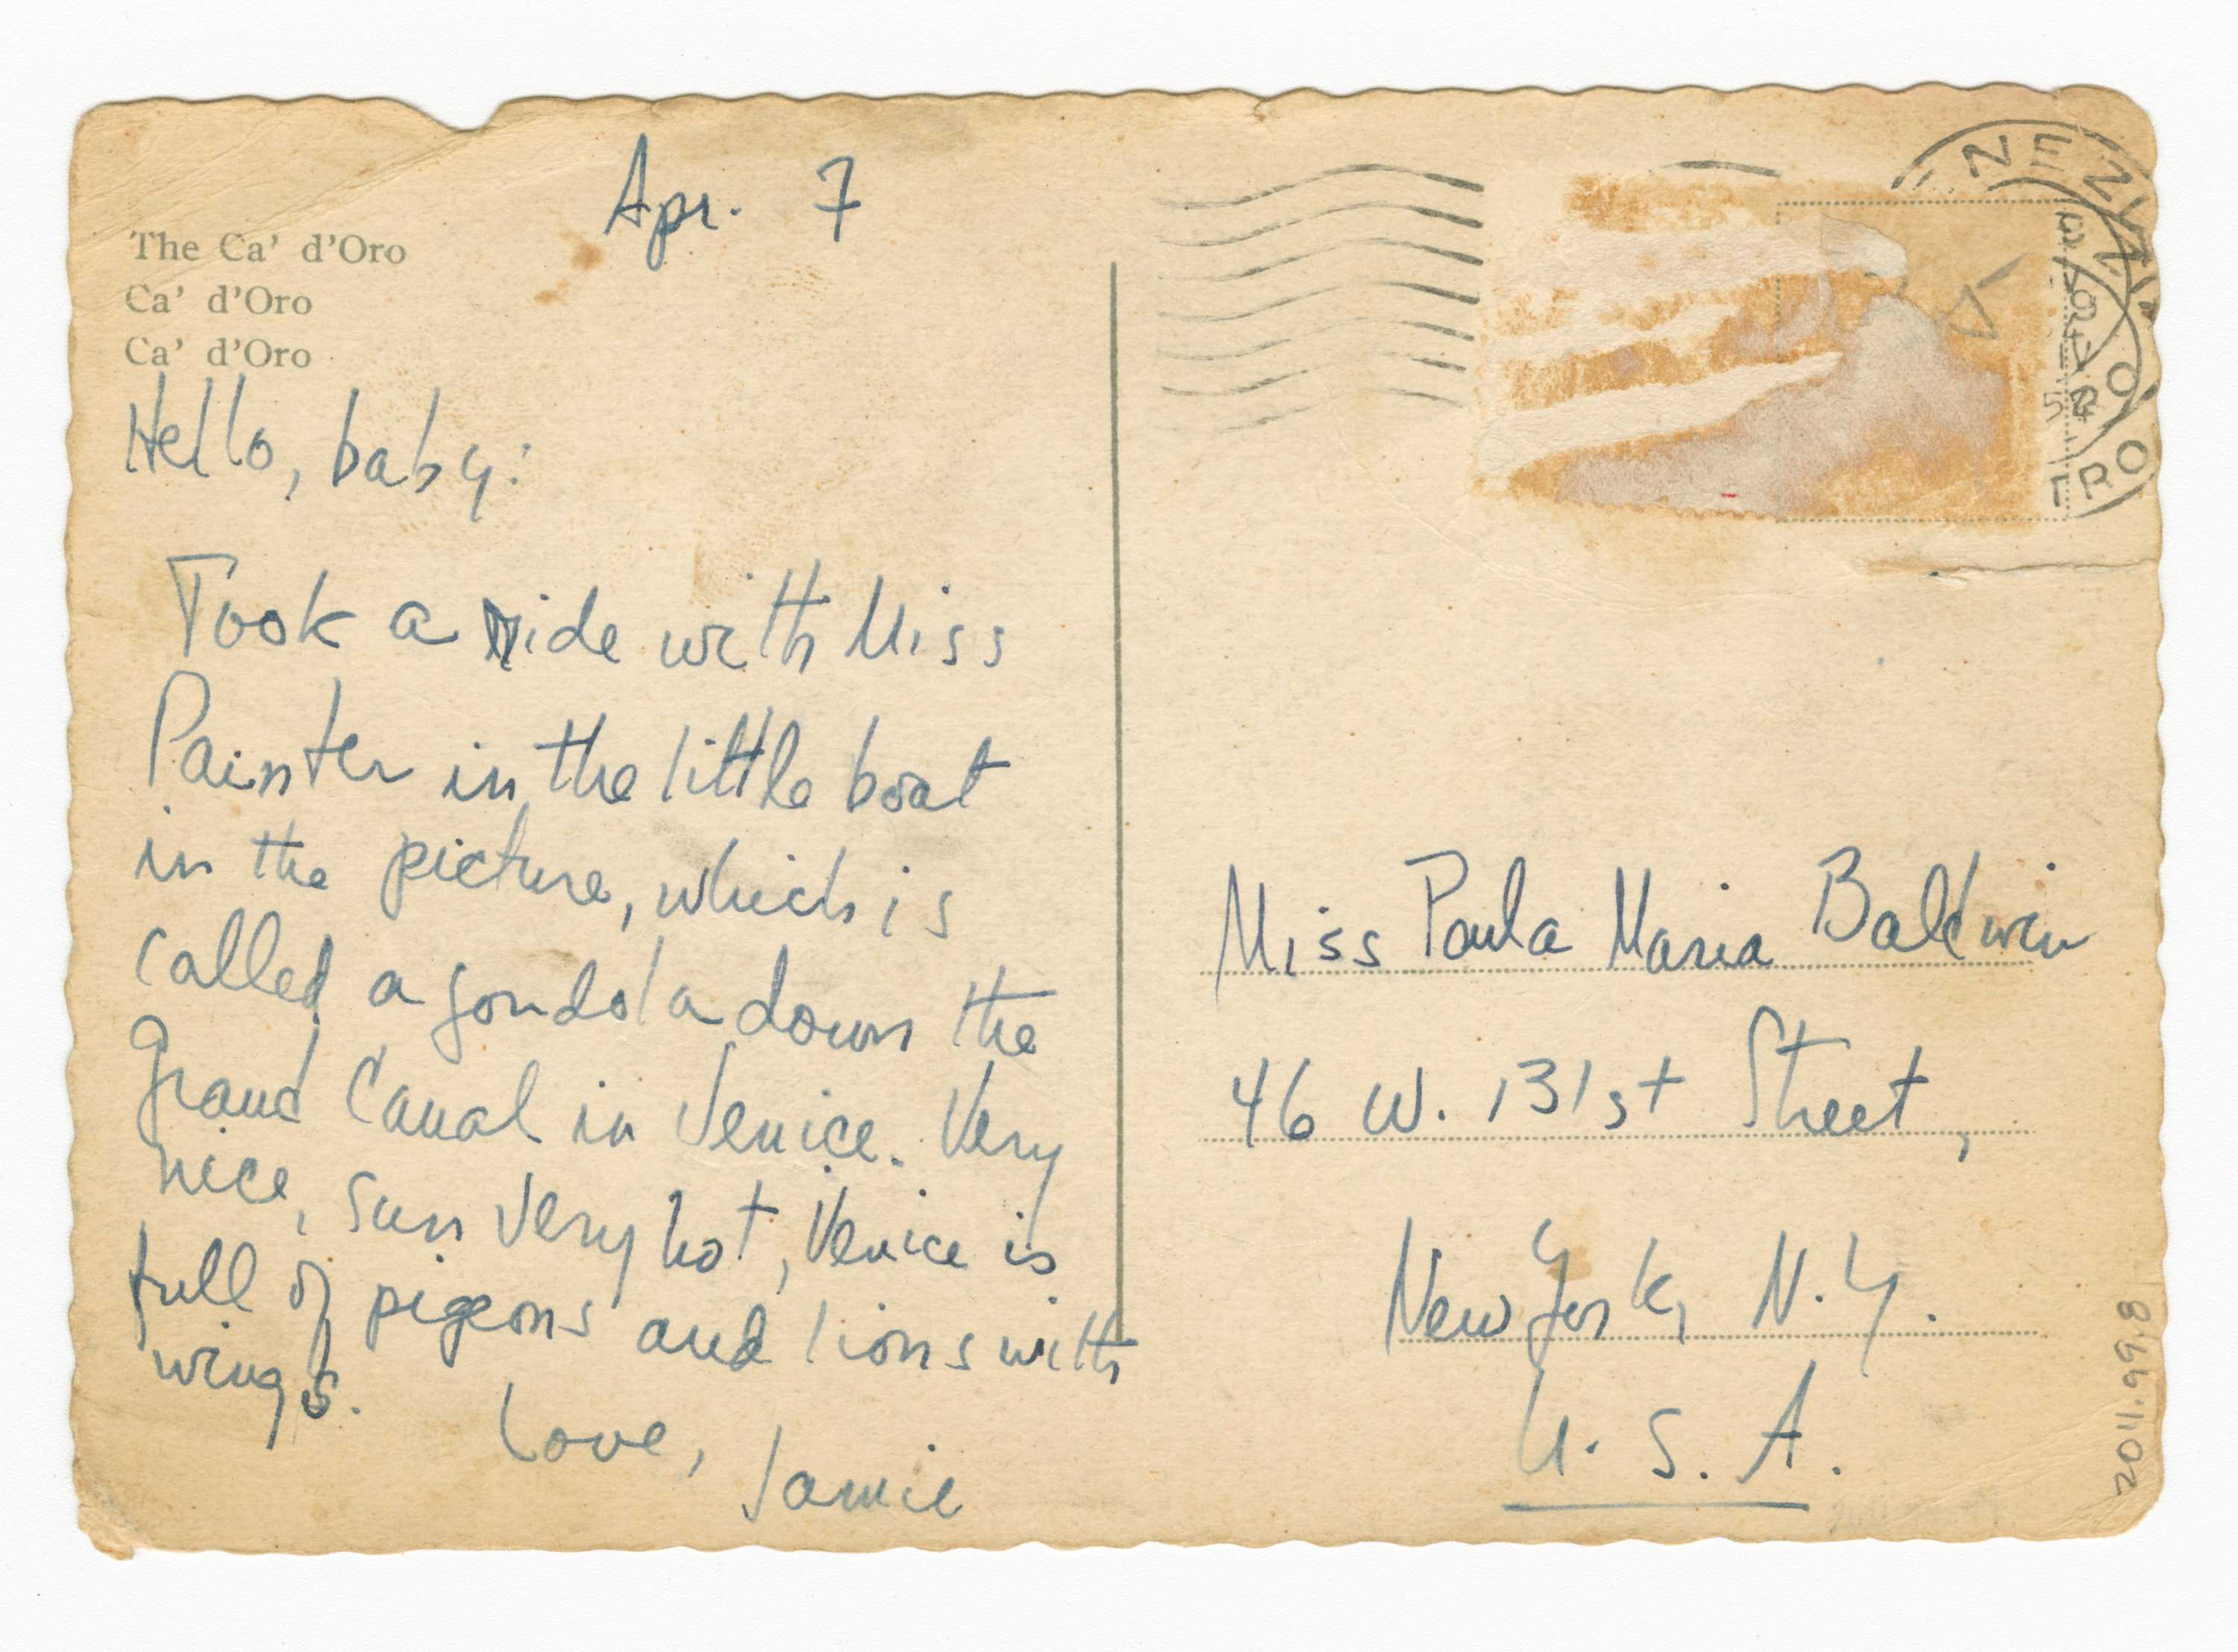 Postcard from James Baldwin to his sister Paula Baldwin telling her about the a gondola ride that he took on the Grand Canal in Venice. The Ca' d'Oro is depicted on the front of the post card.